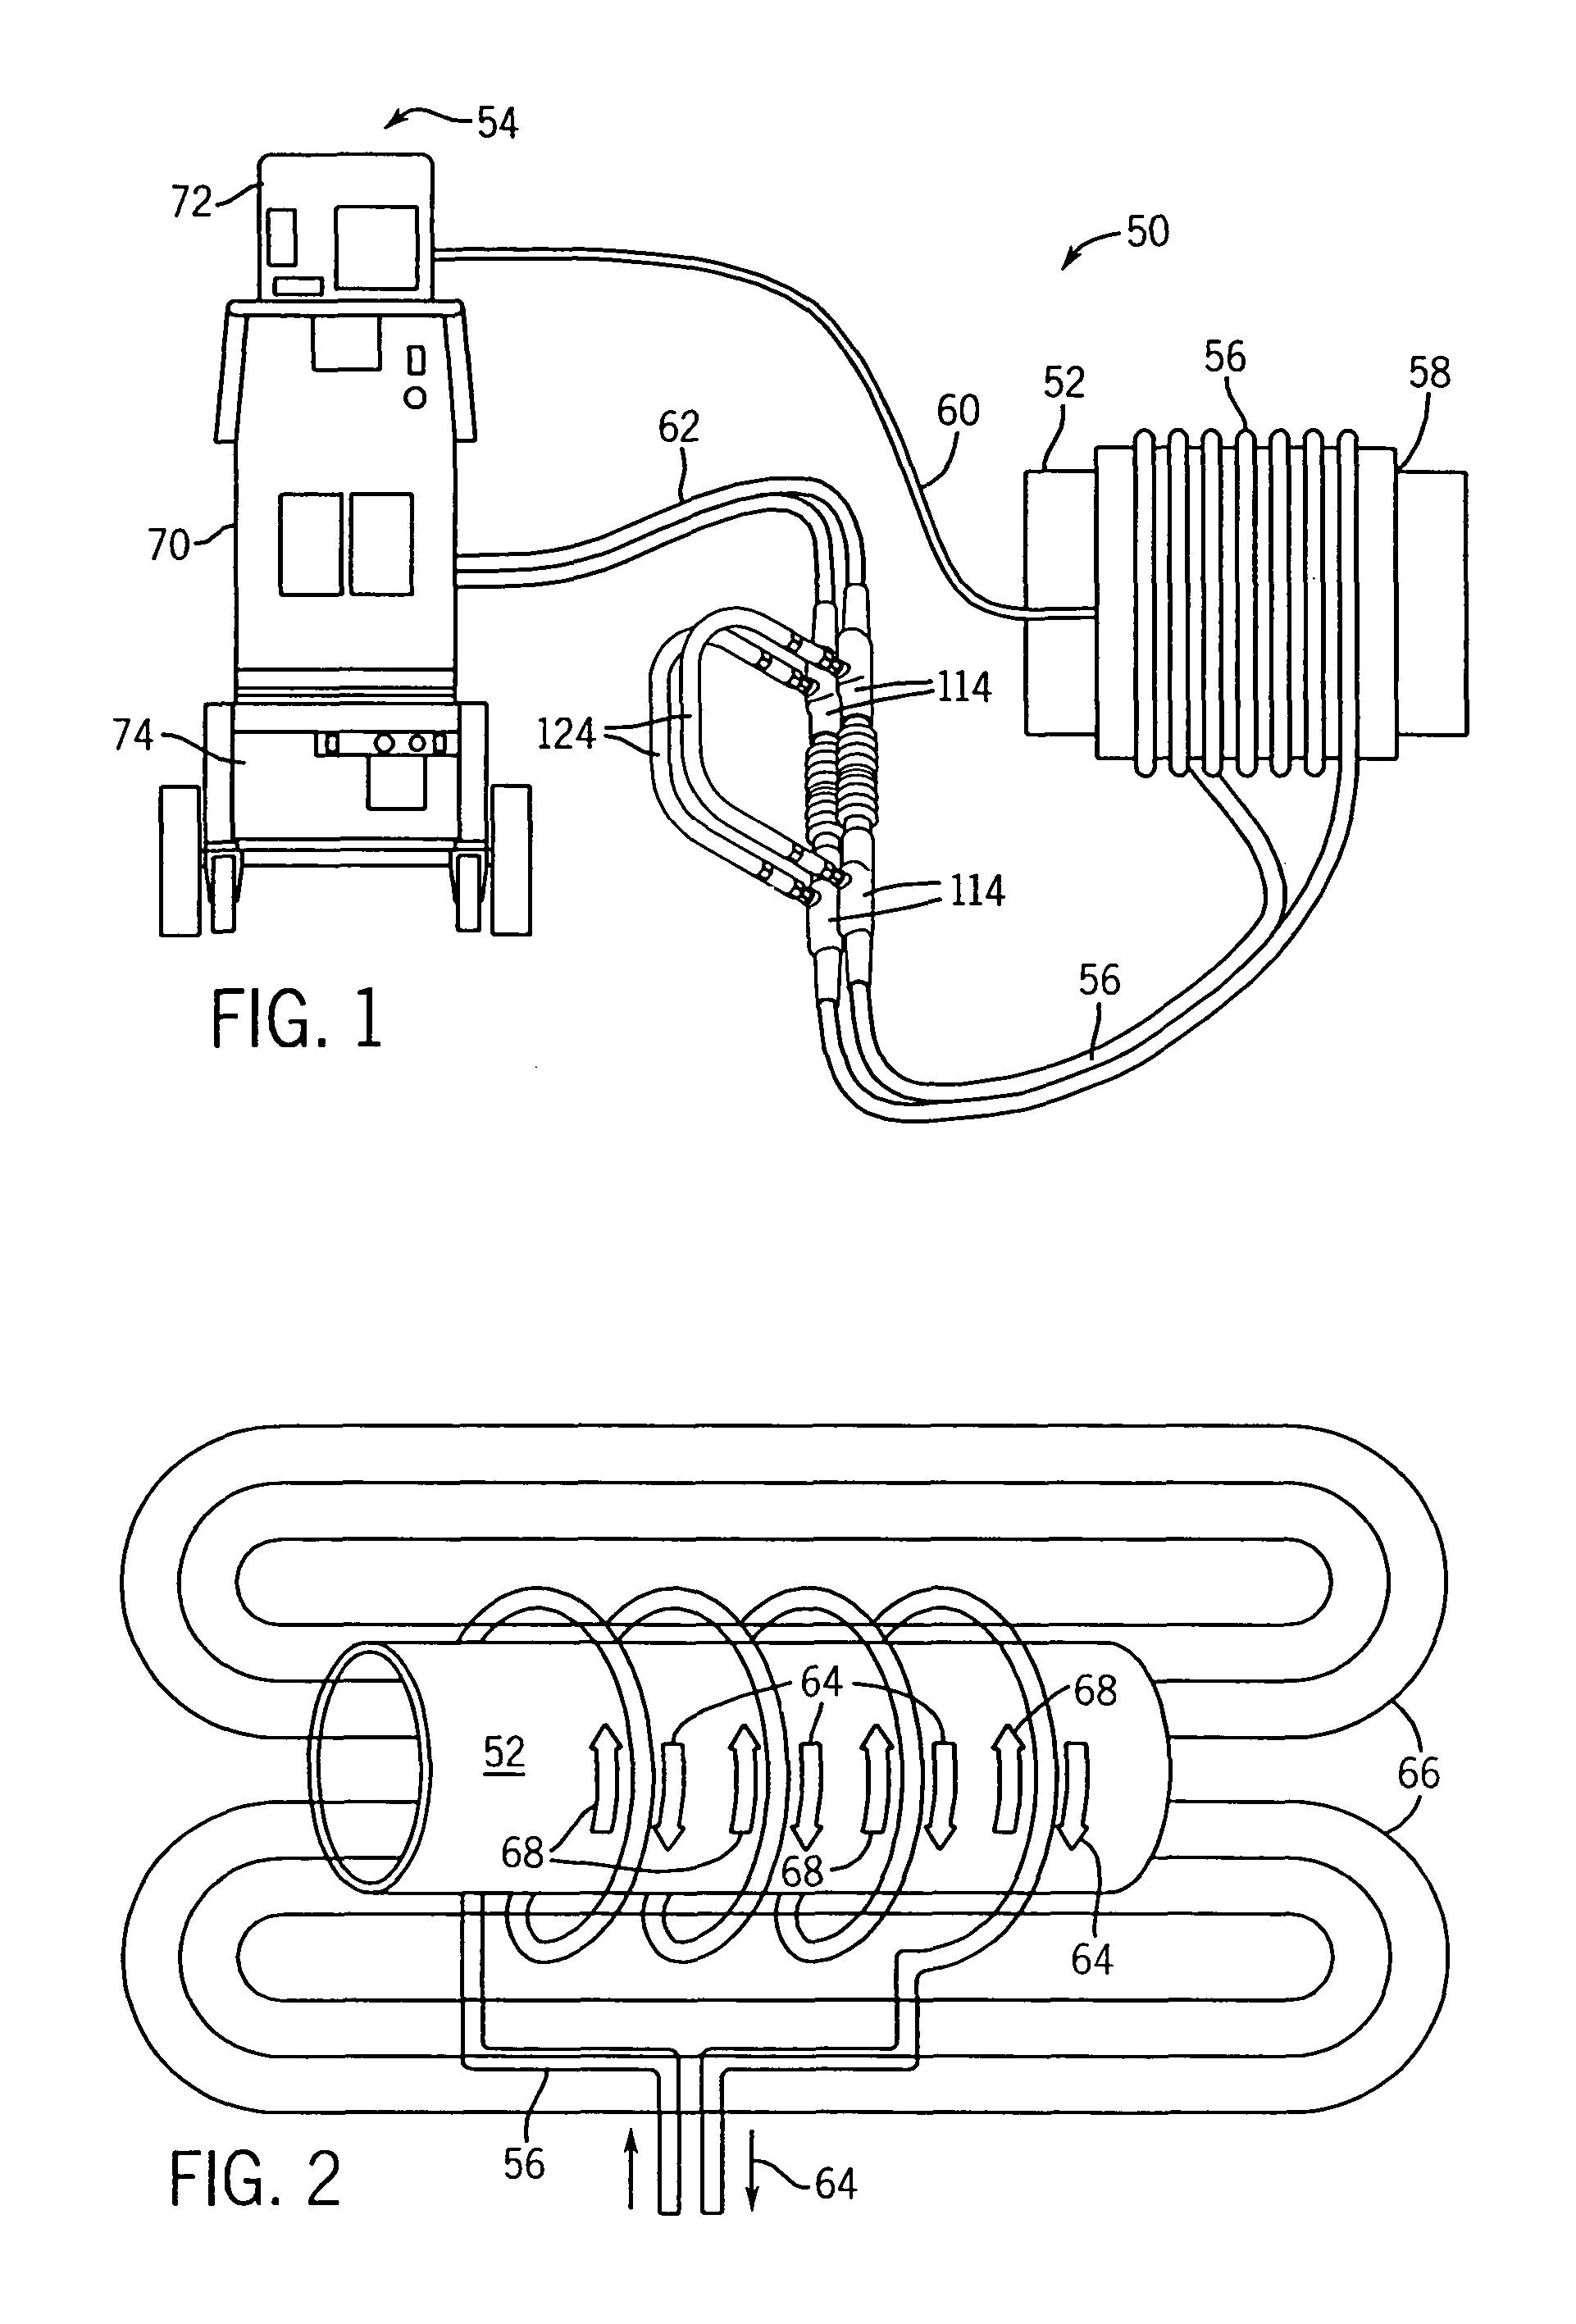 On-site induction heating apparatus